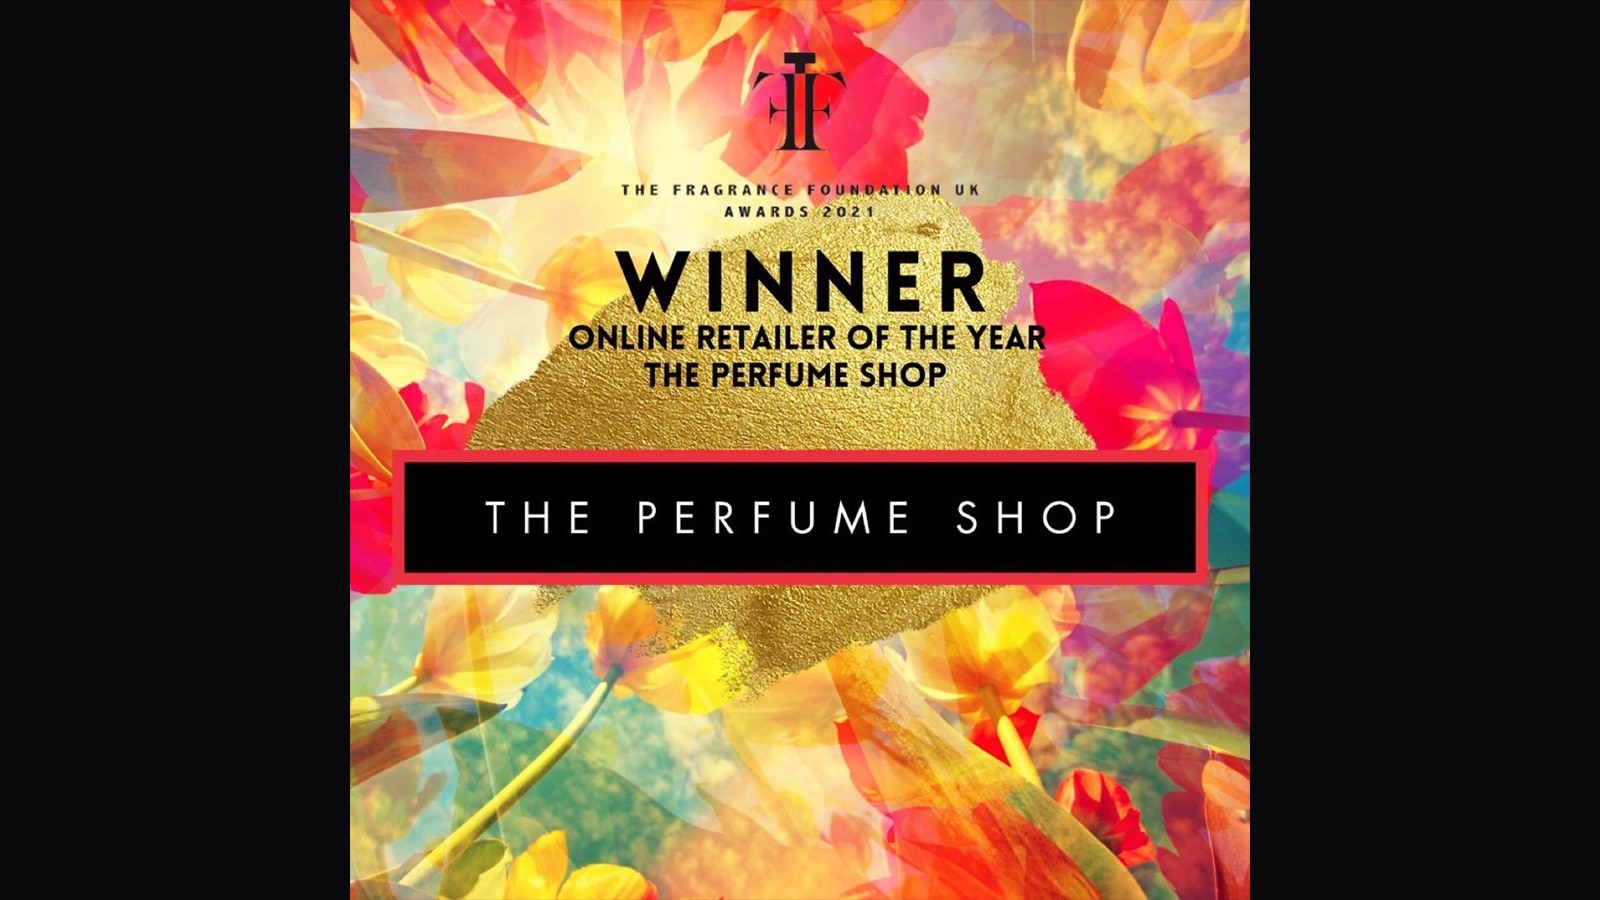 The Perfume Shop is Awarded as the Online Retailer of the Year